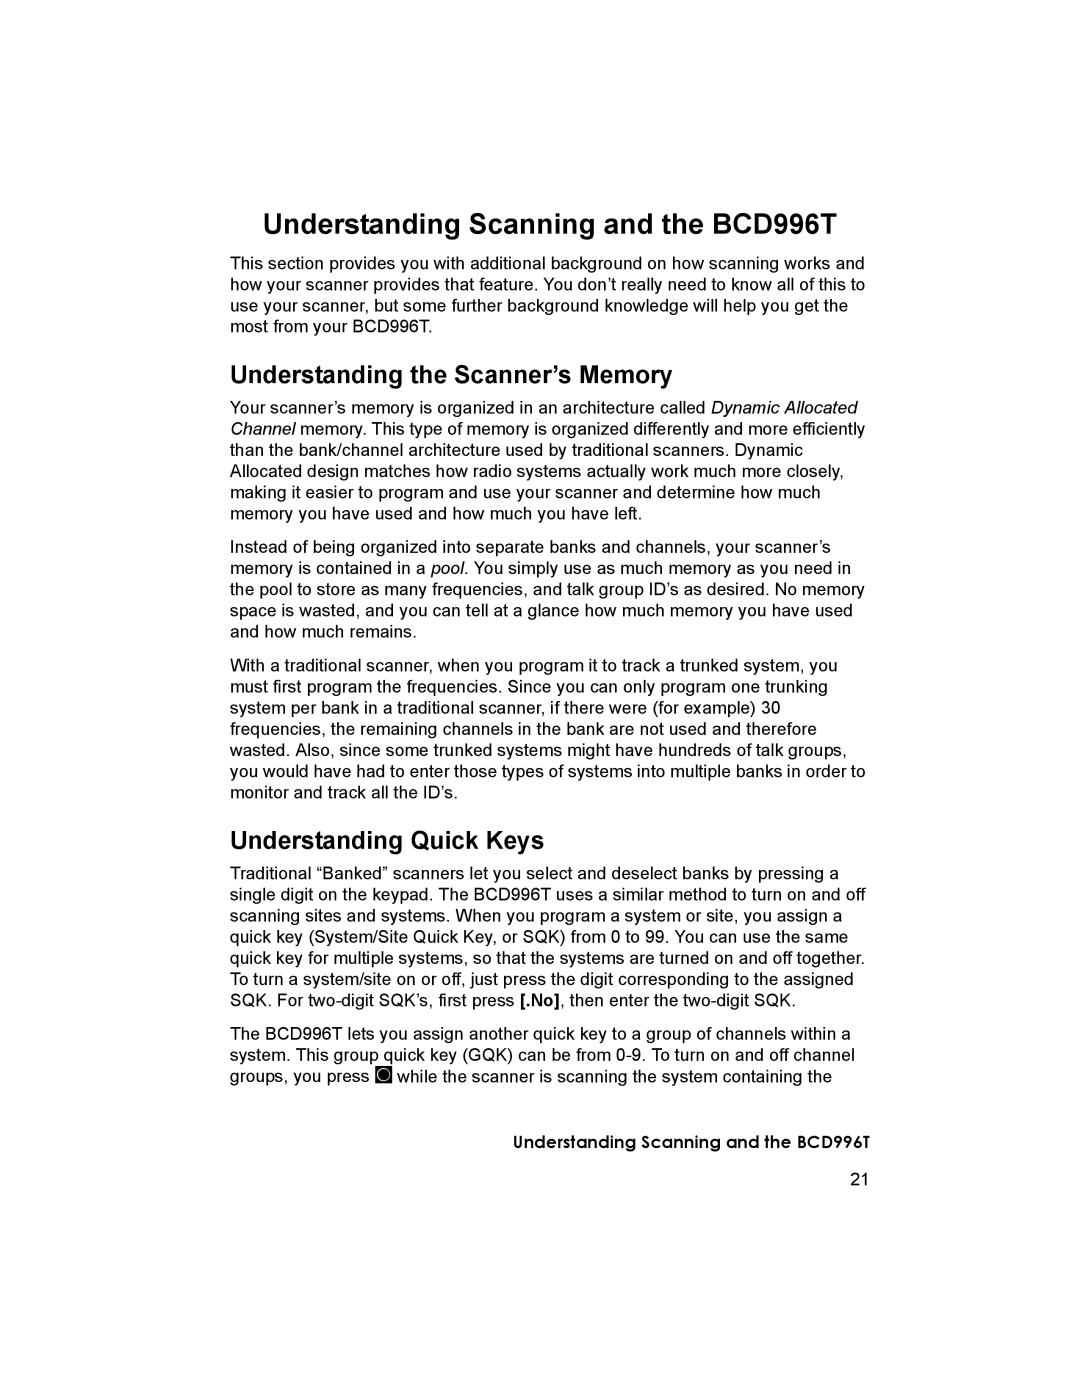 Uniden manual Understanding Scanning and the BCD996T, Understanding the Scanner’s Memory, Understanding Quick Keys 